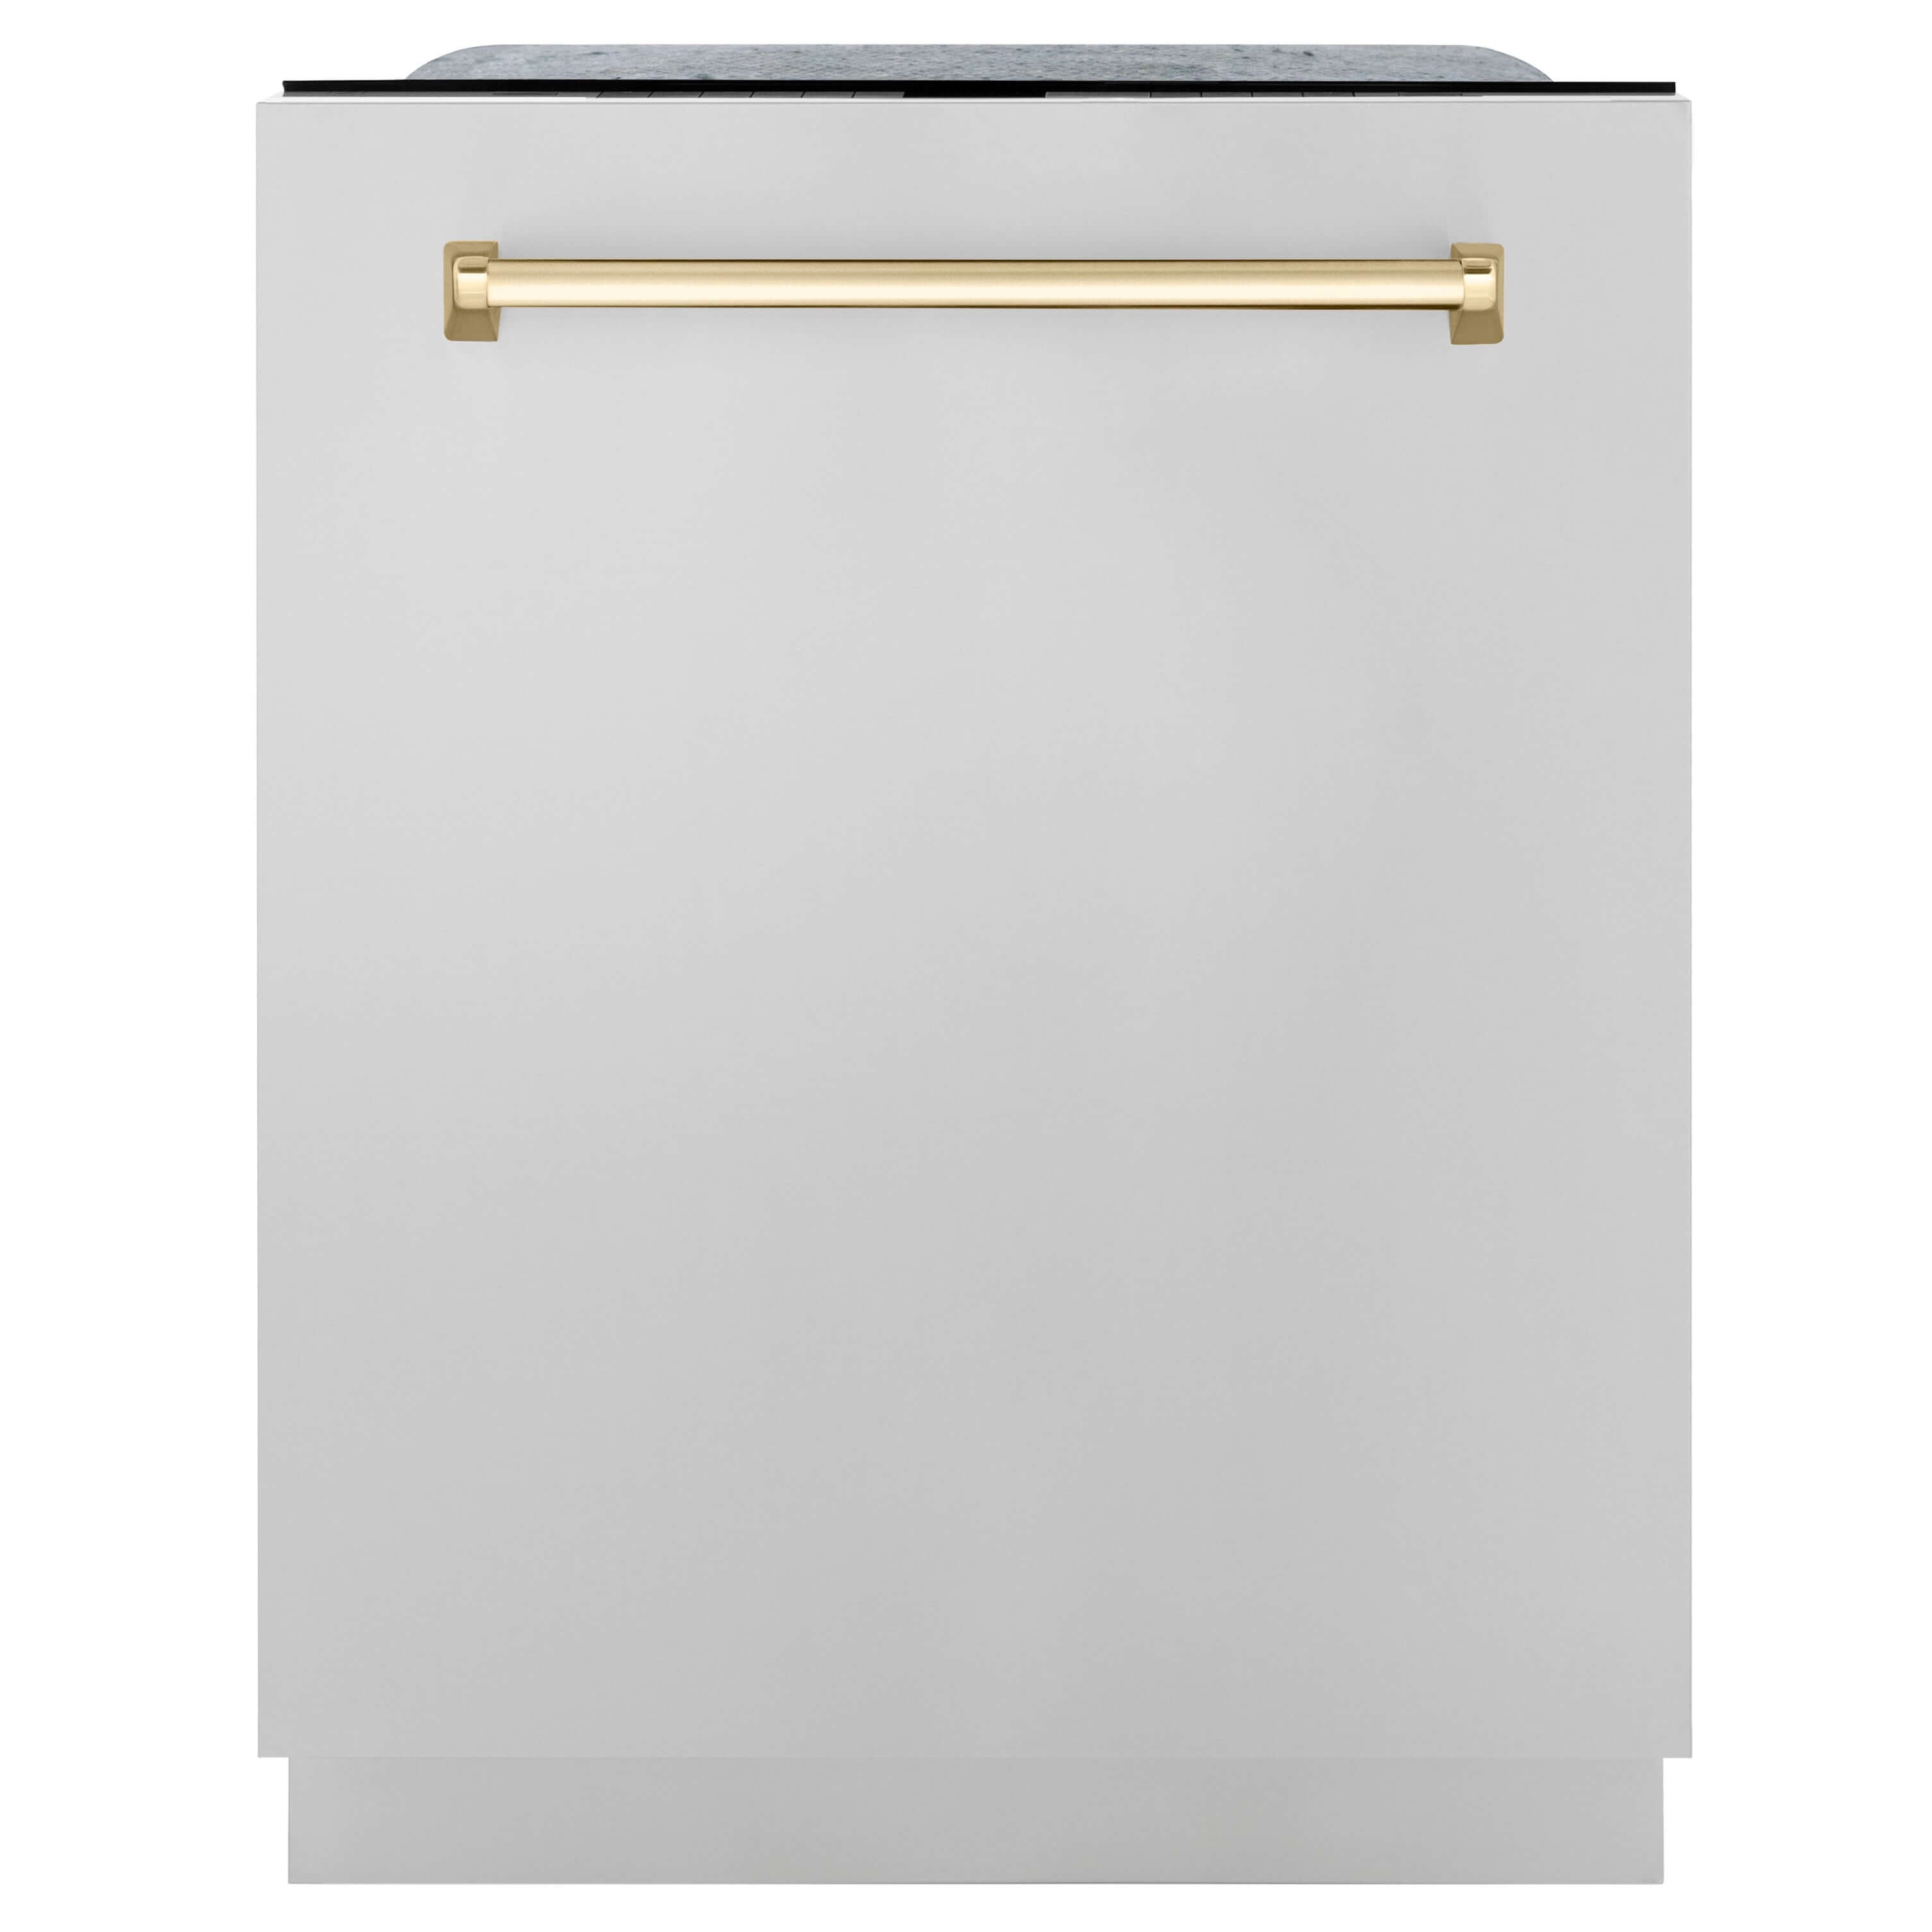 ZLINE Autograph Edition 24 in. Monument Dishwasher with Stainless Steel panel and Gold Handle front.